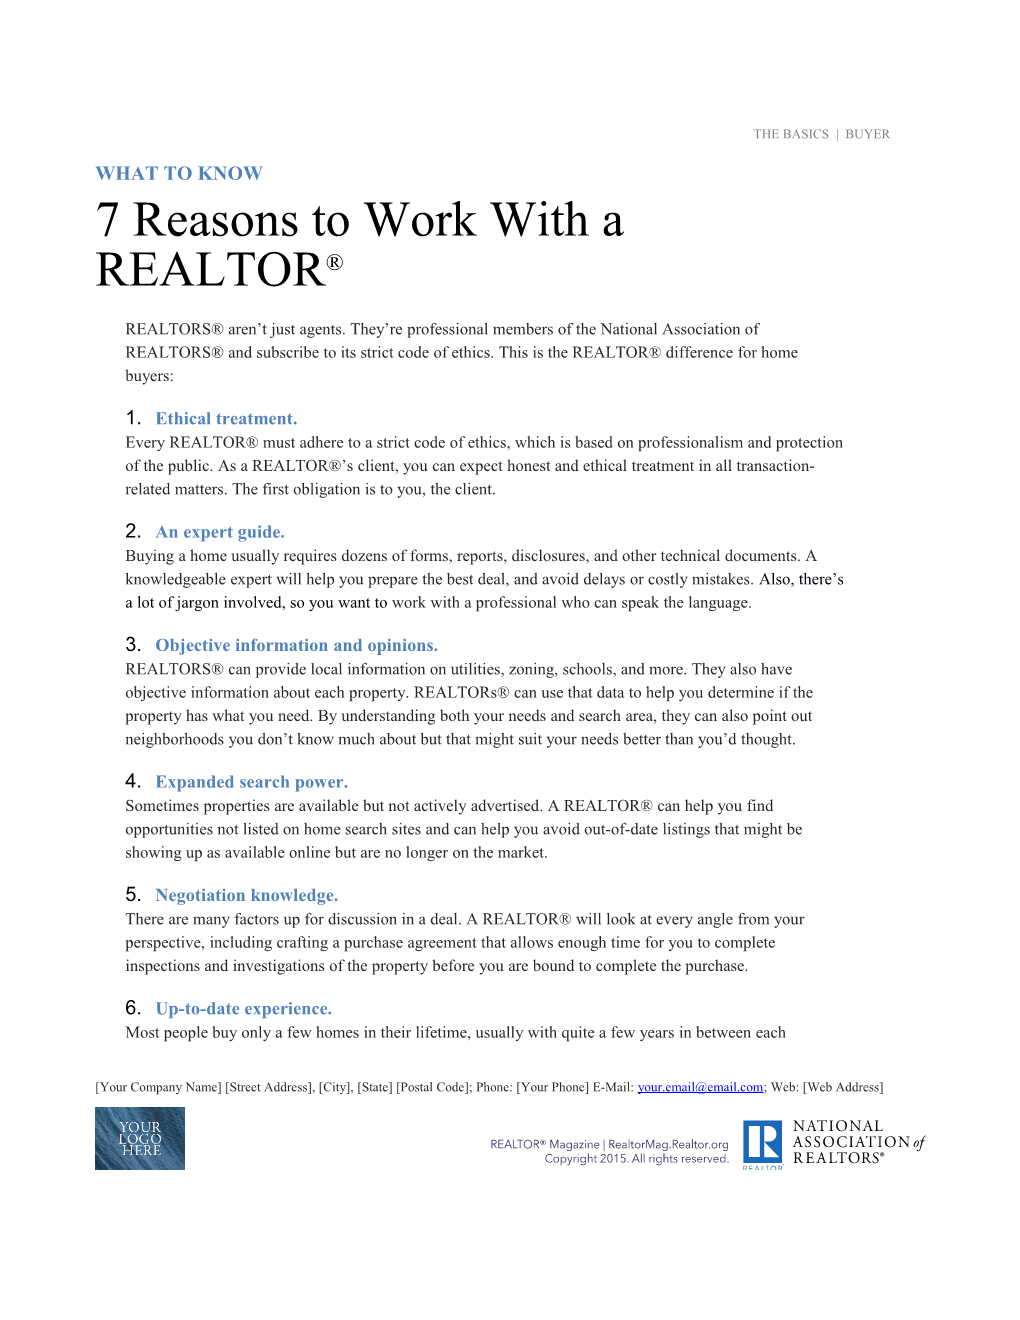 7 Reasons to Work with a REALTOR